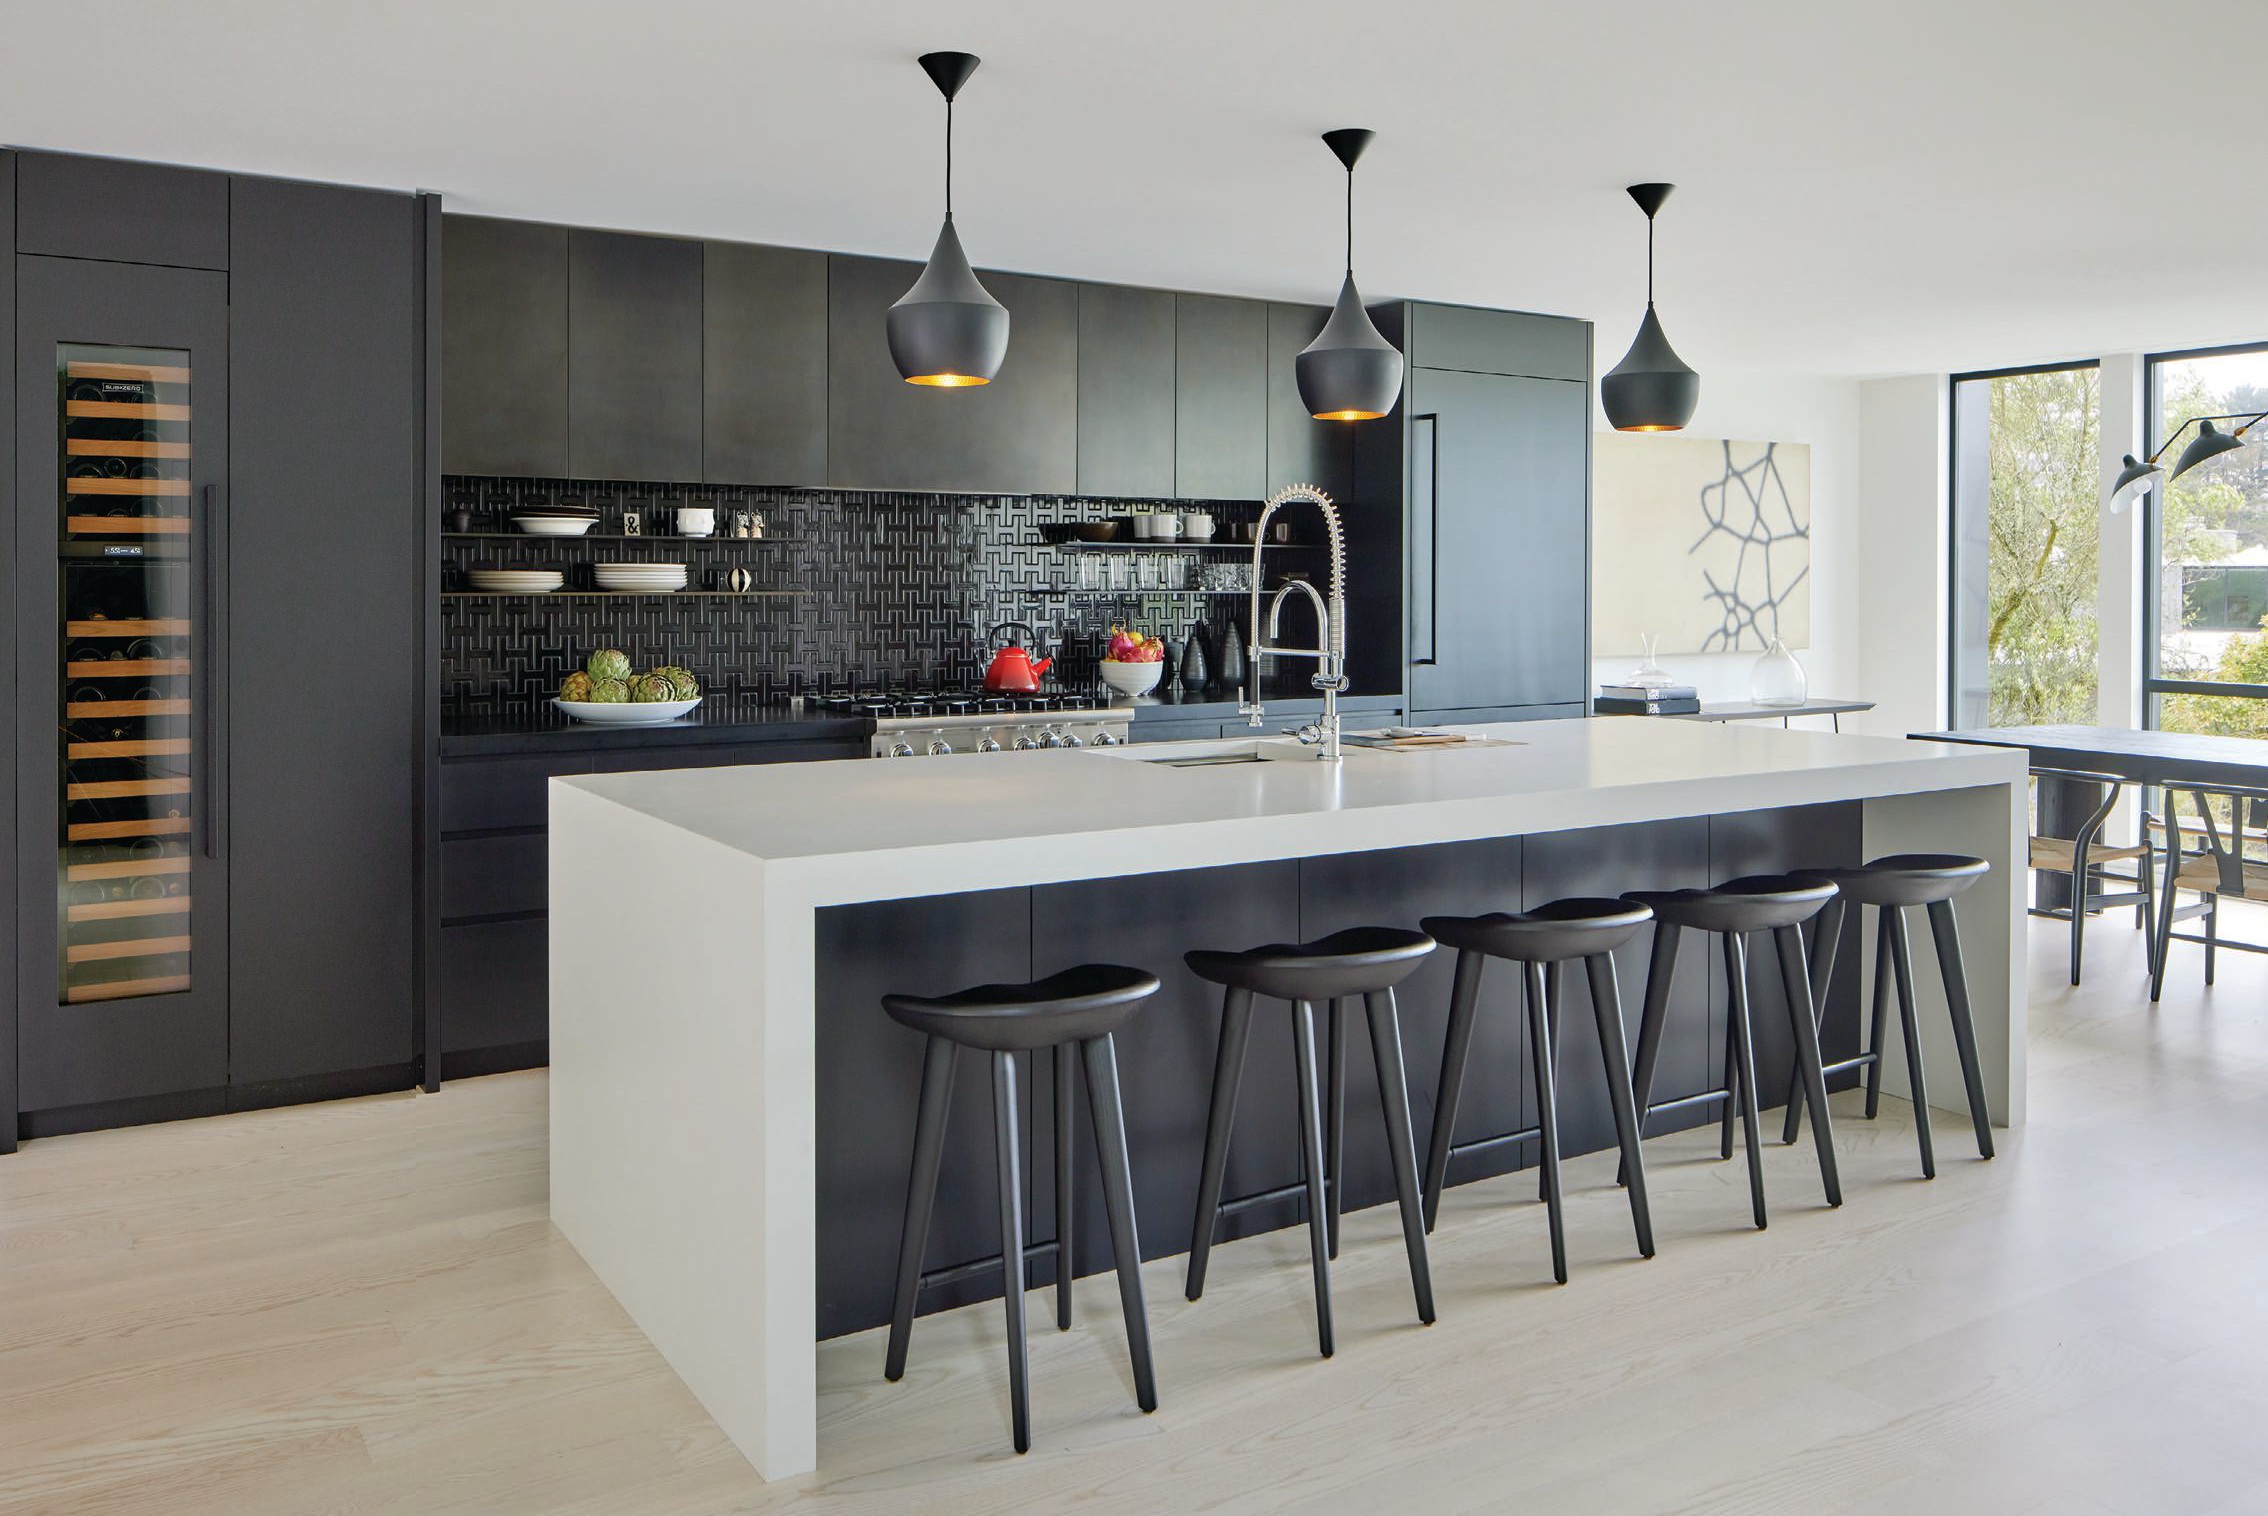 A Cambria countertop and tractor stools from DWR stand out in the black-and- white kitchen PHOTOGRAPHED BY BRUCE DAMONTE